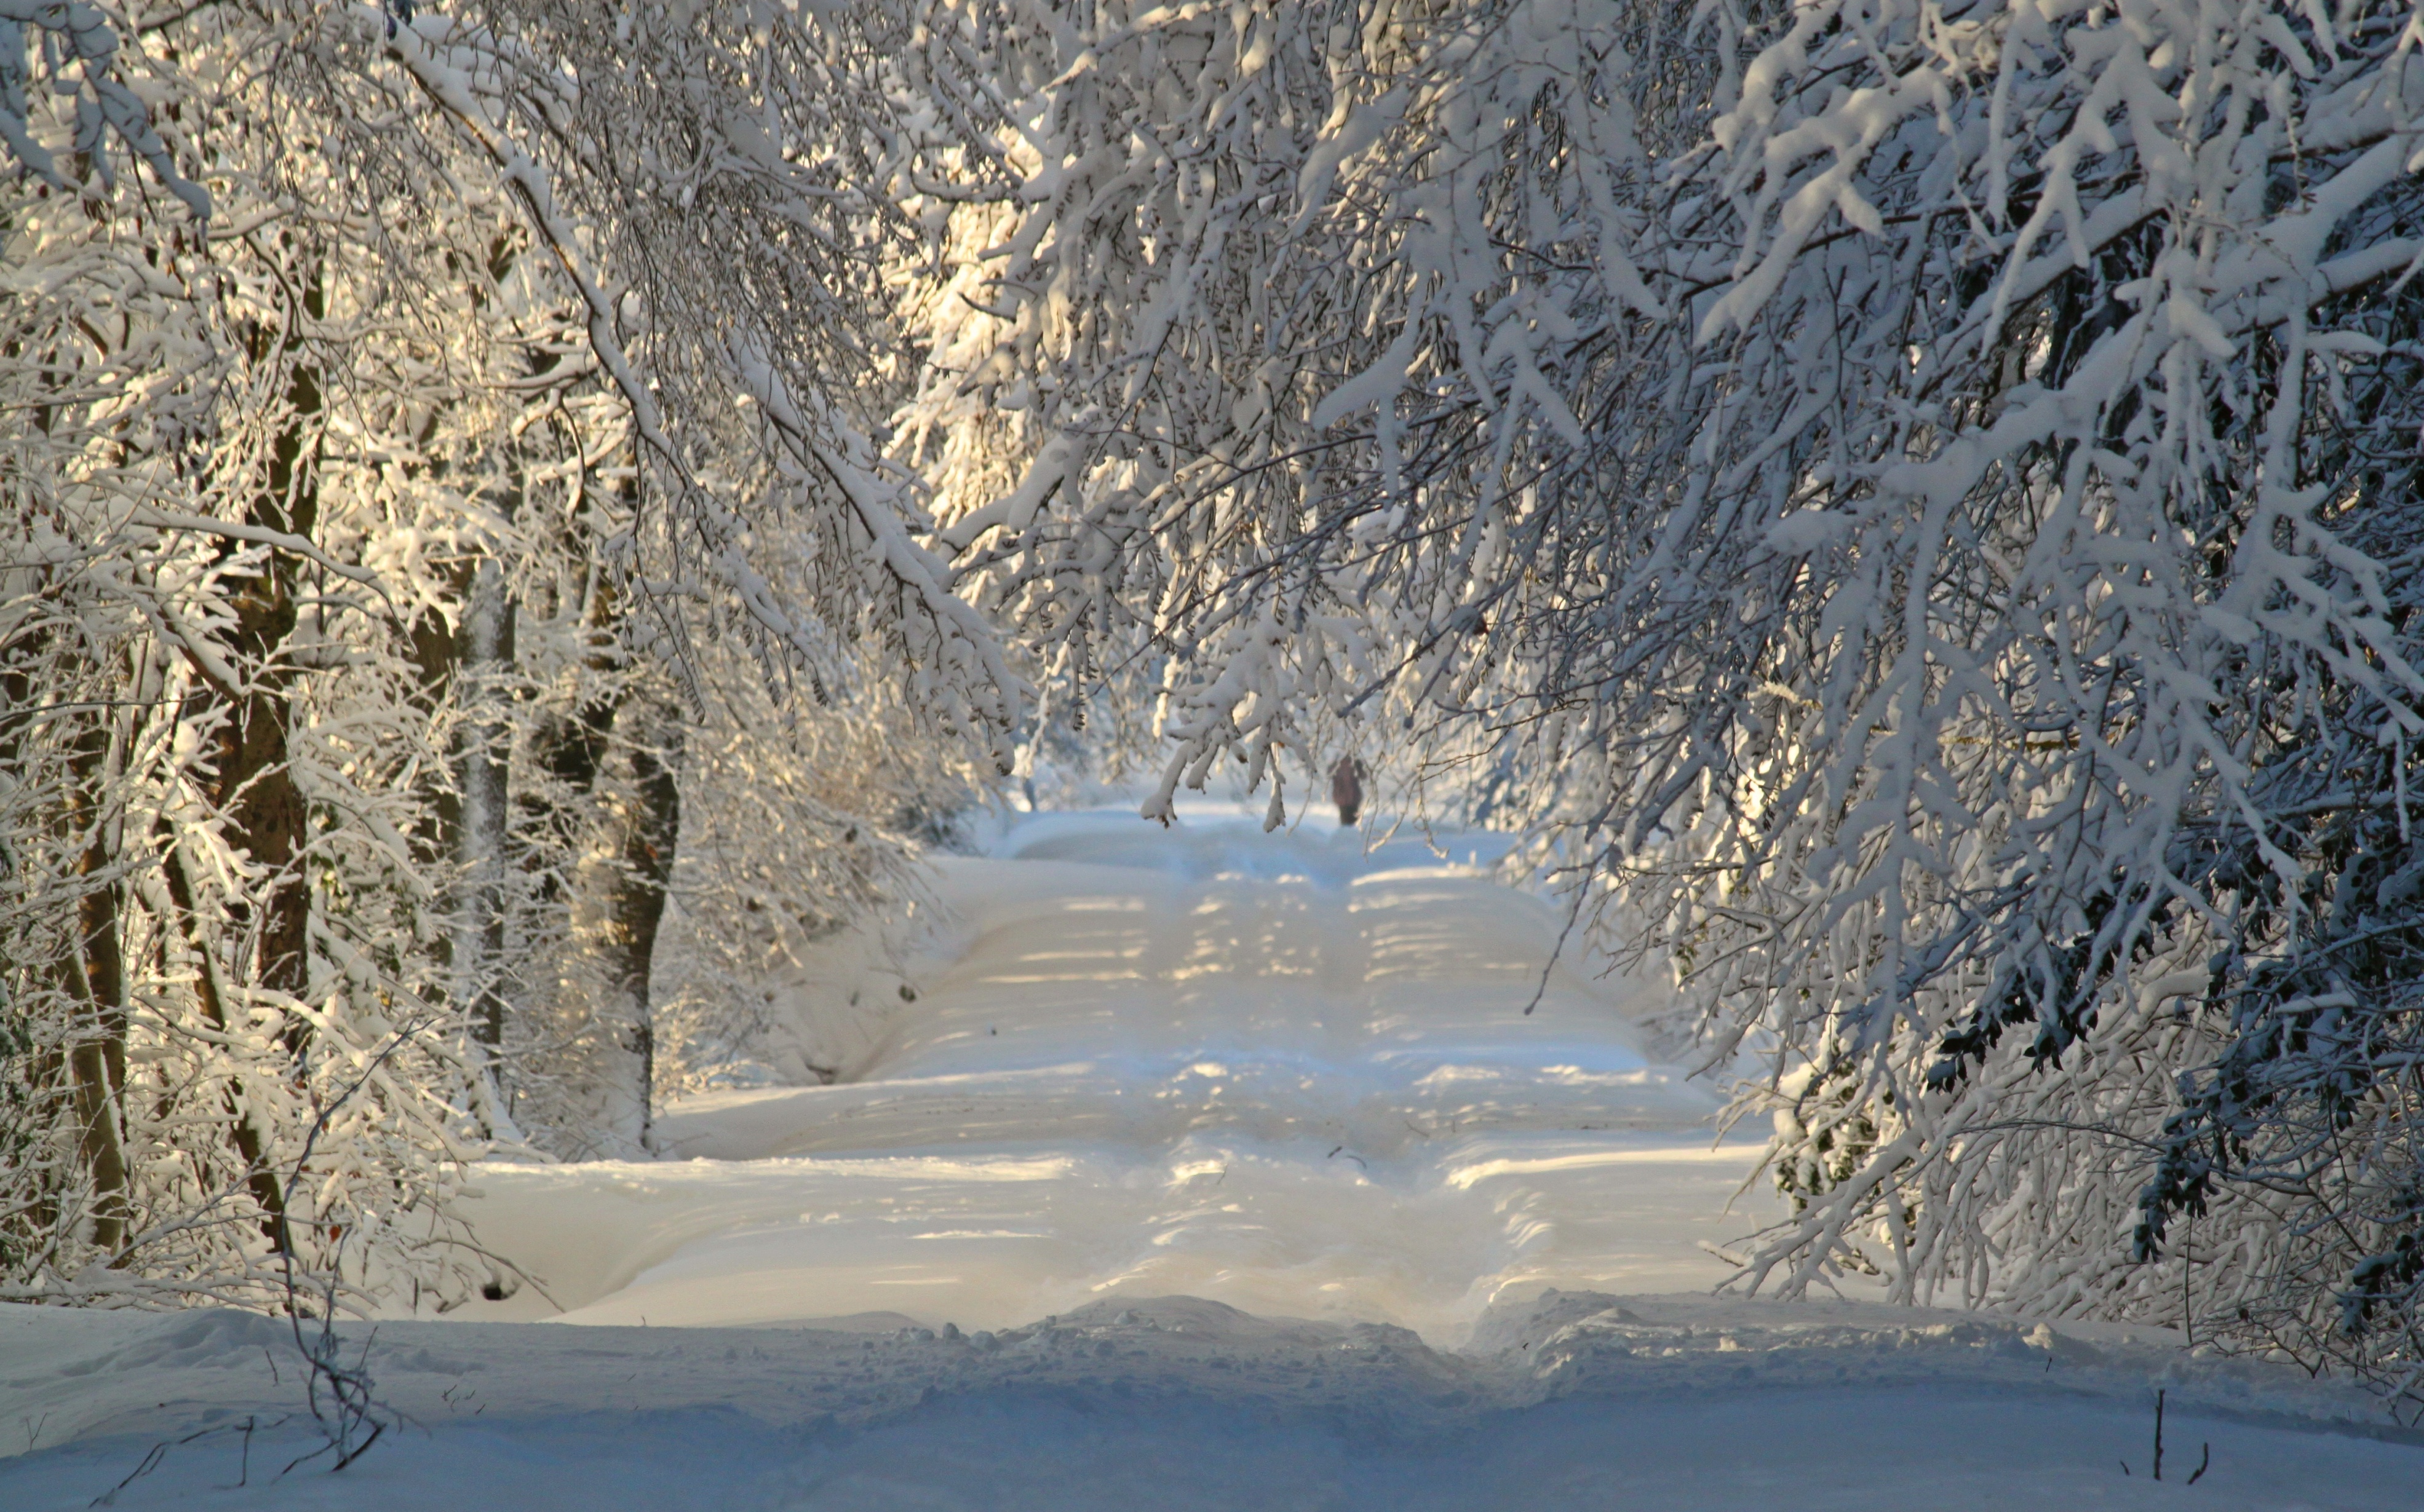 A winter road through snow-covered trees